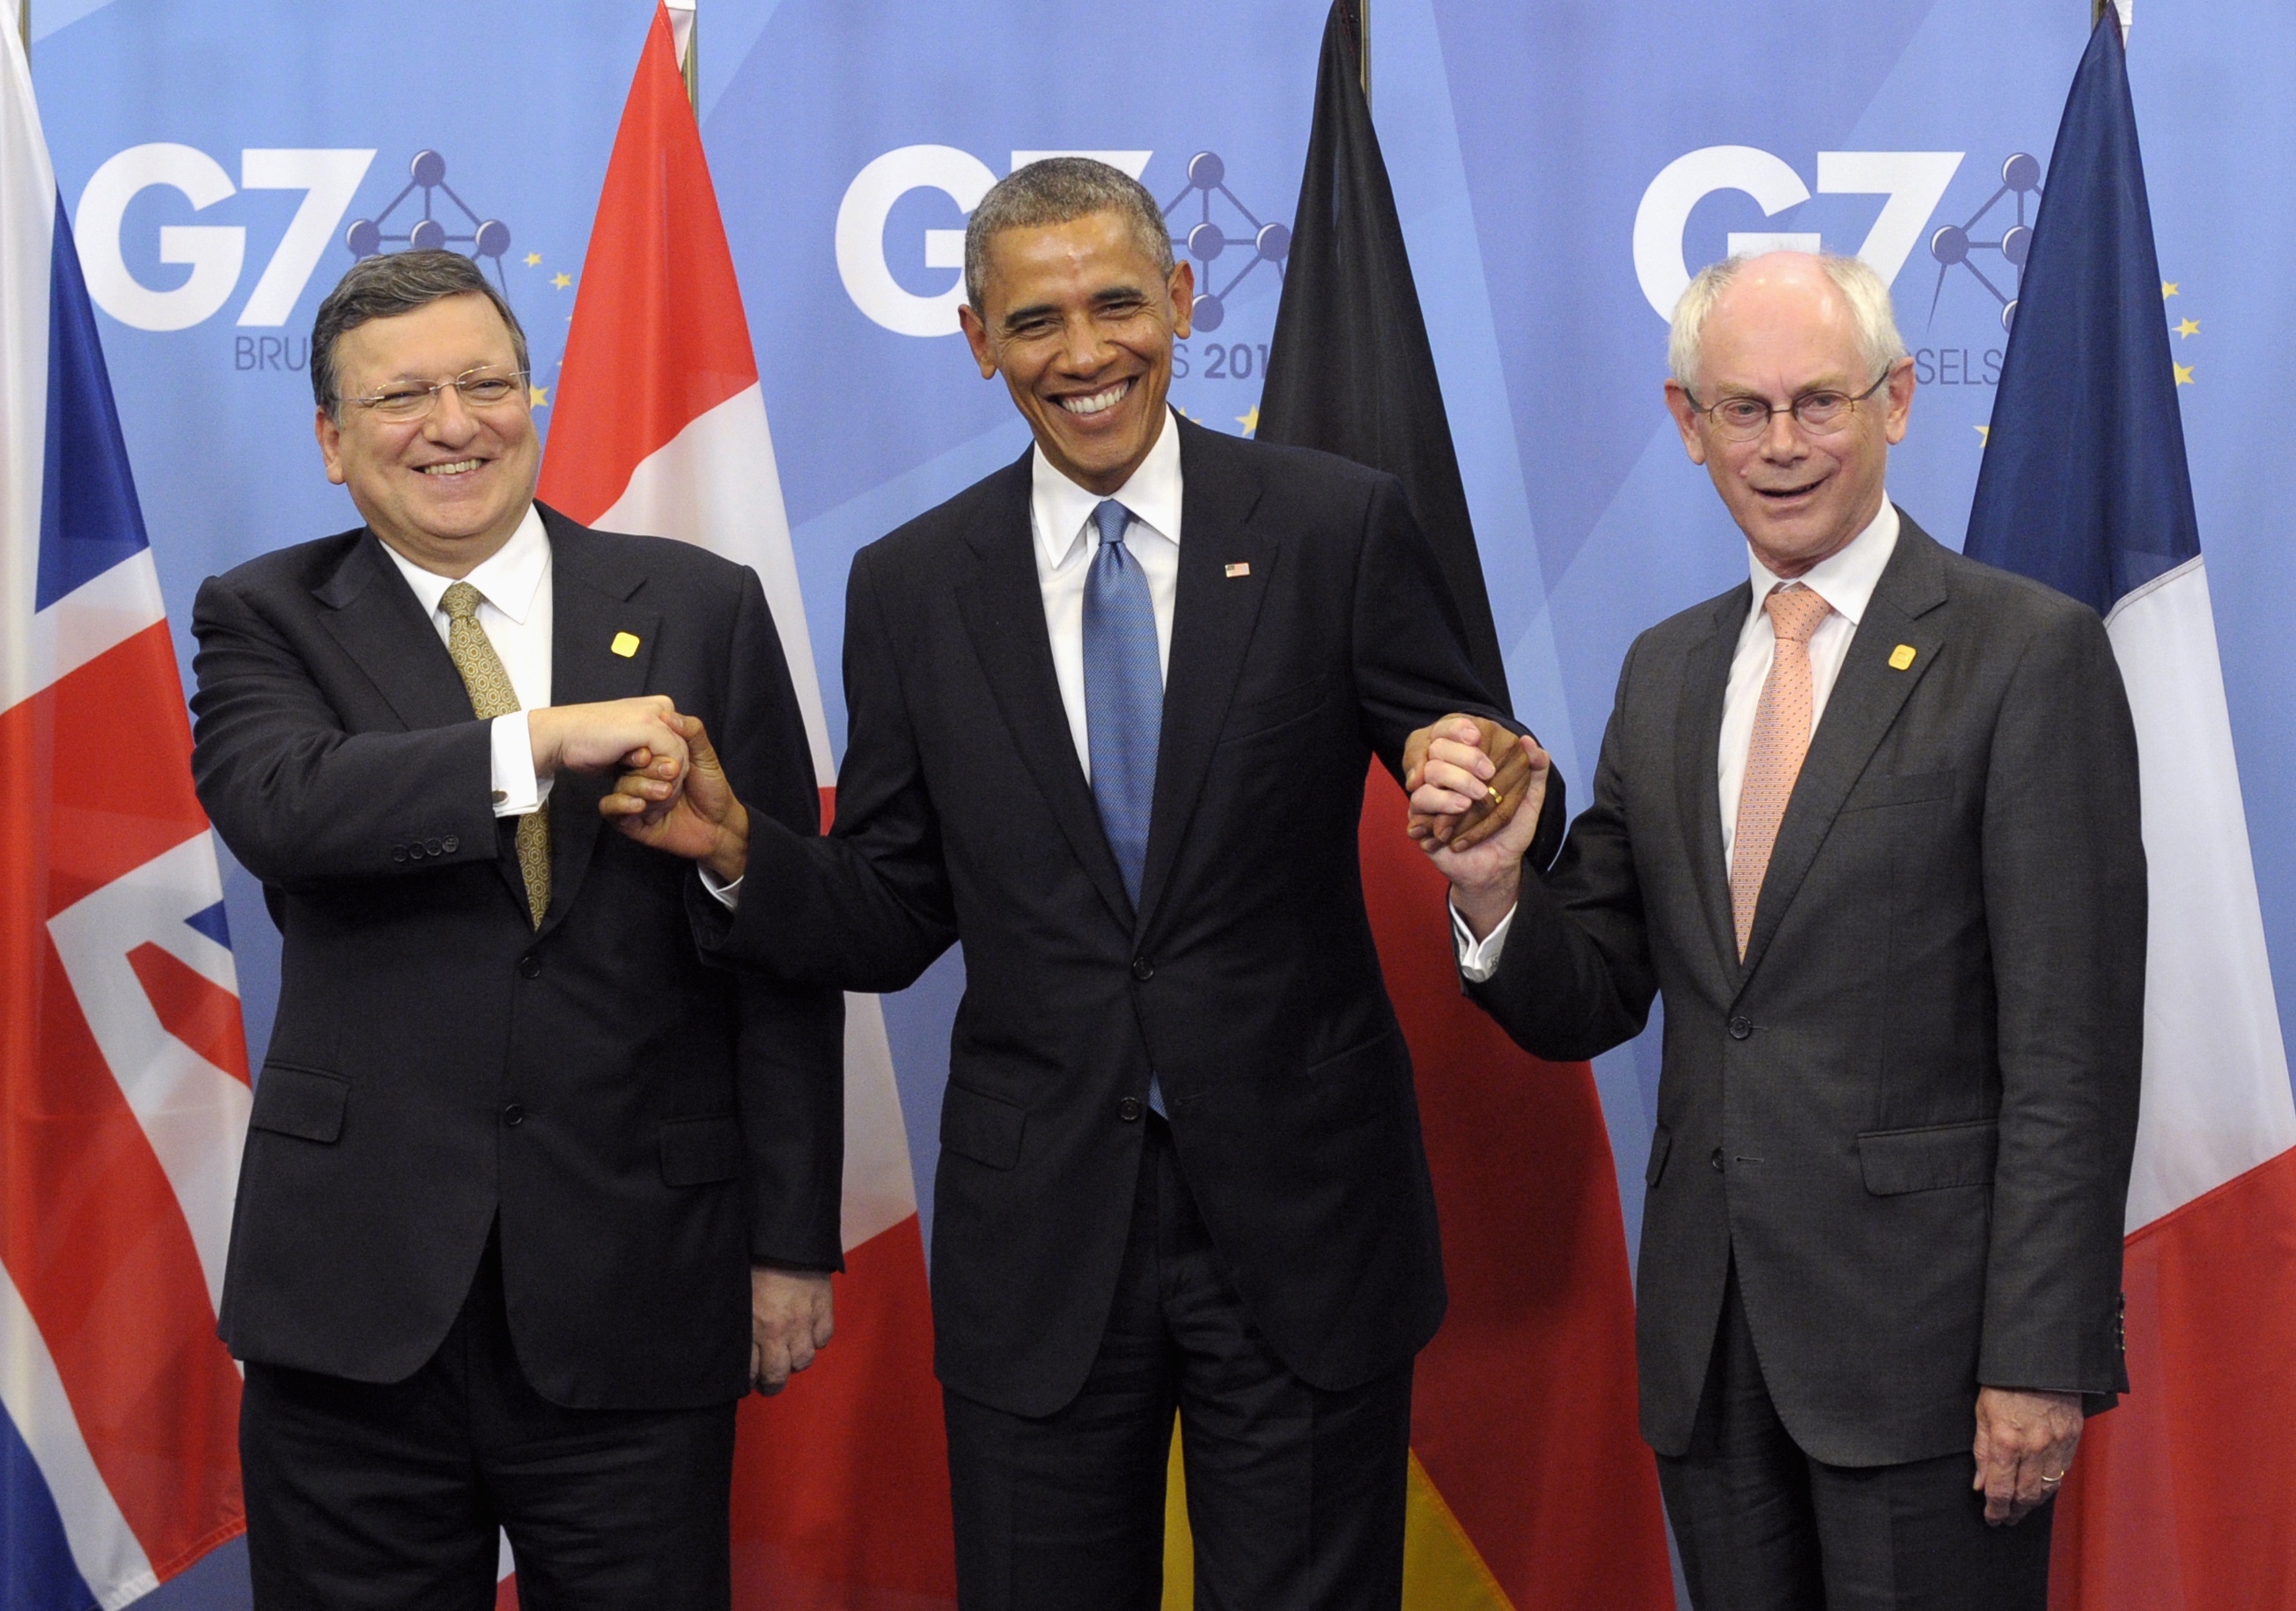 World leaders arrive in Brussels for G7 summit The Bulletin